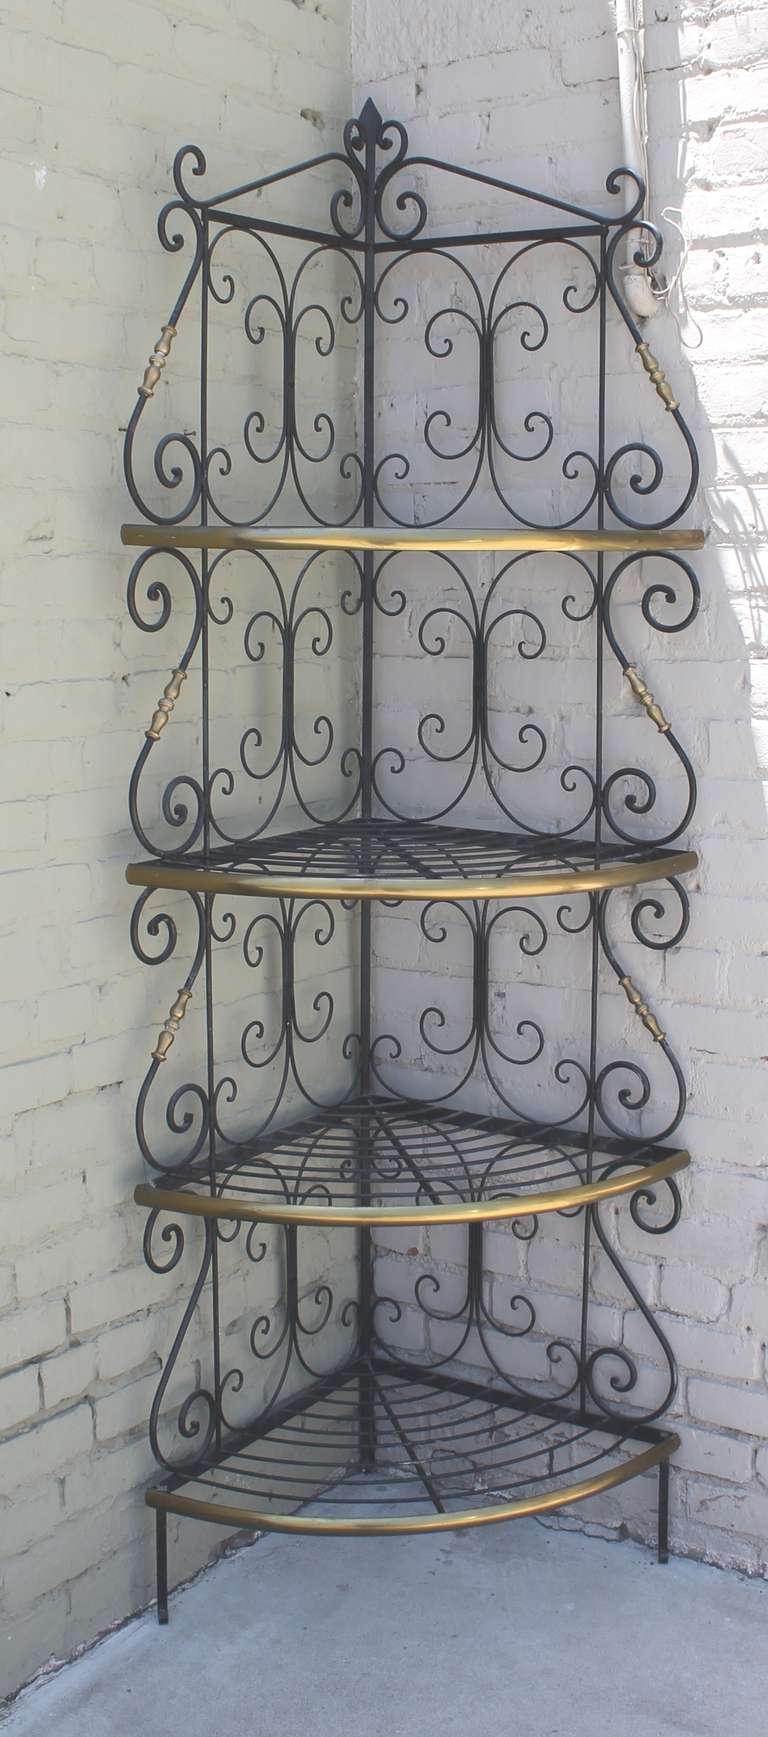 This is quite unusual early 20th century bakers bread rack. It is made of brass trim and iron base along with ornate brass trims. It is very sturdy and would fit nicely in any corner.The condition is very good and sturdy,